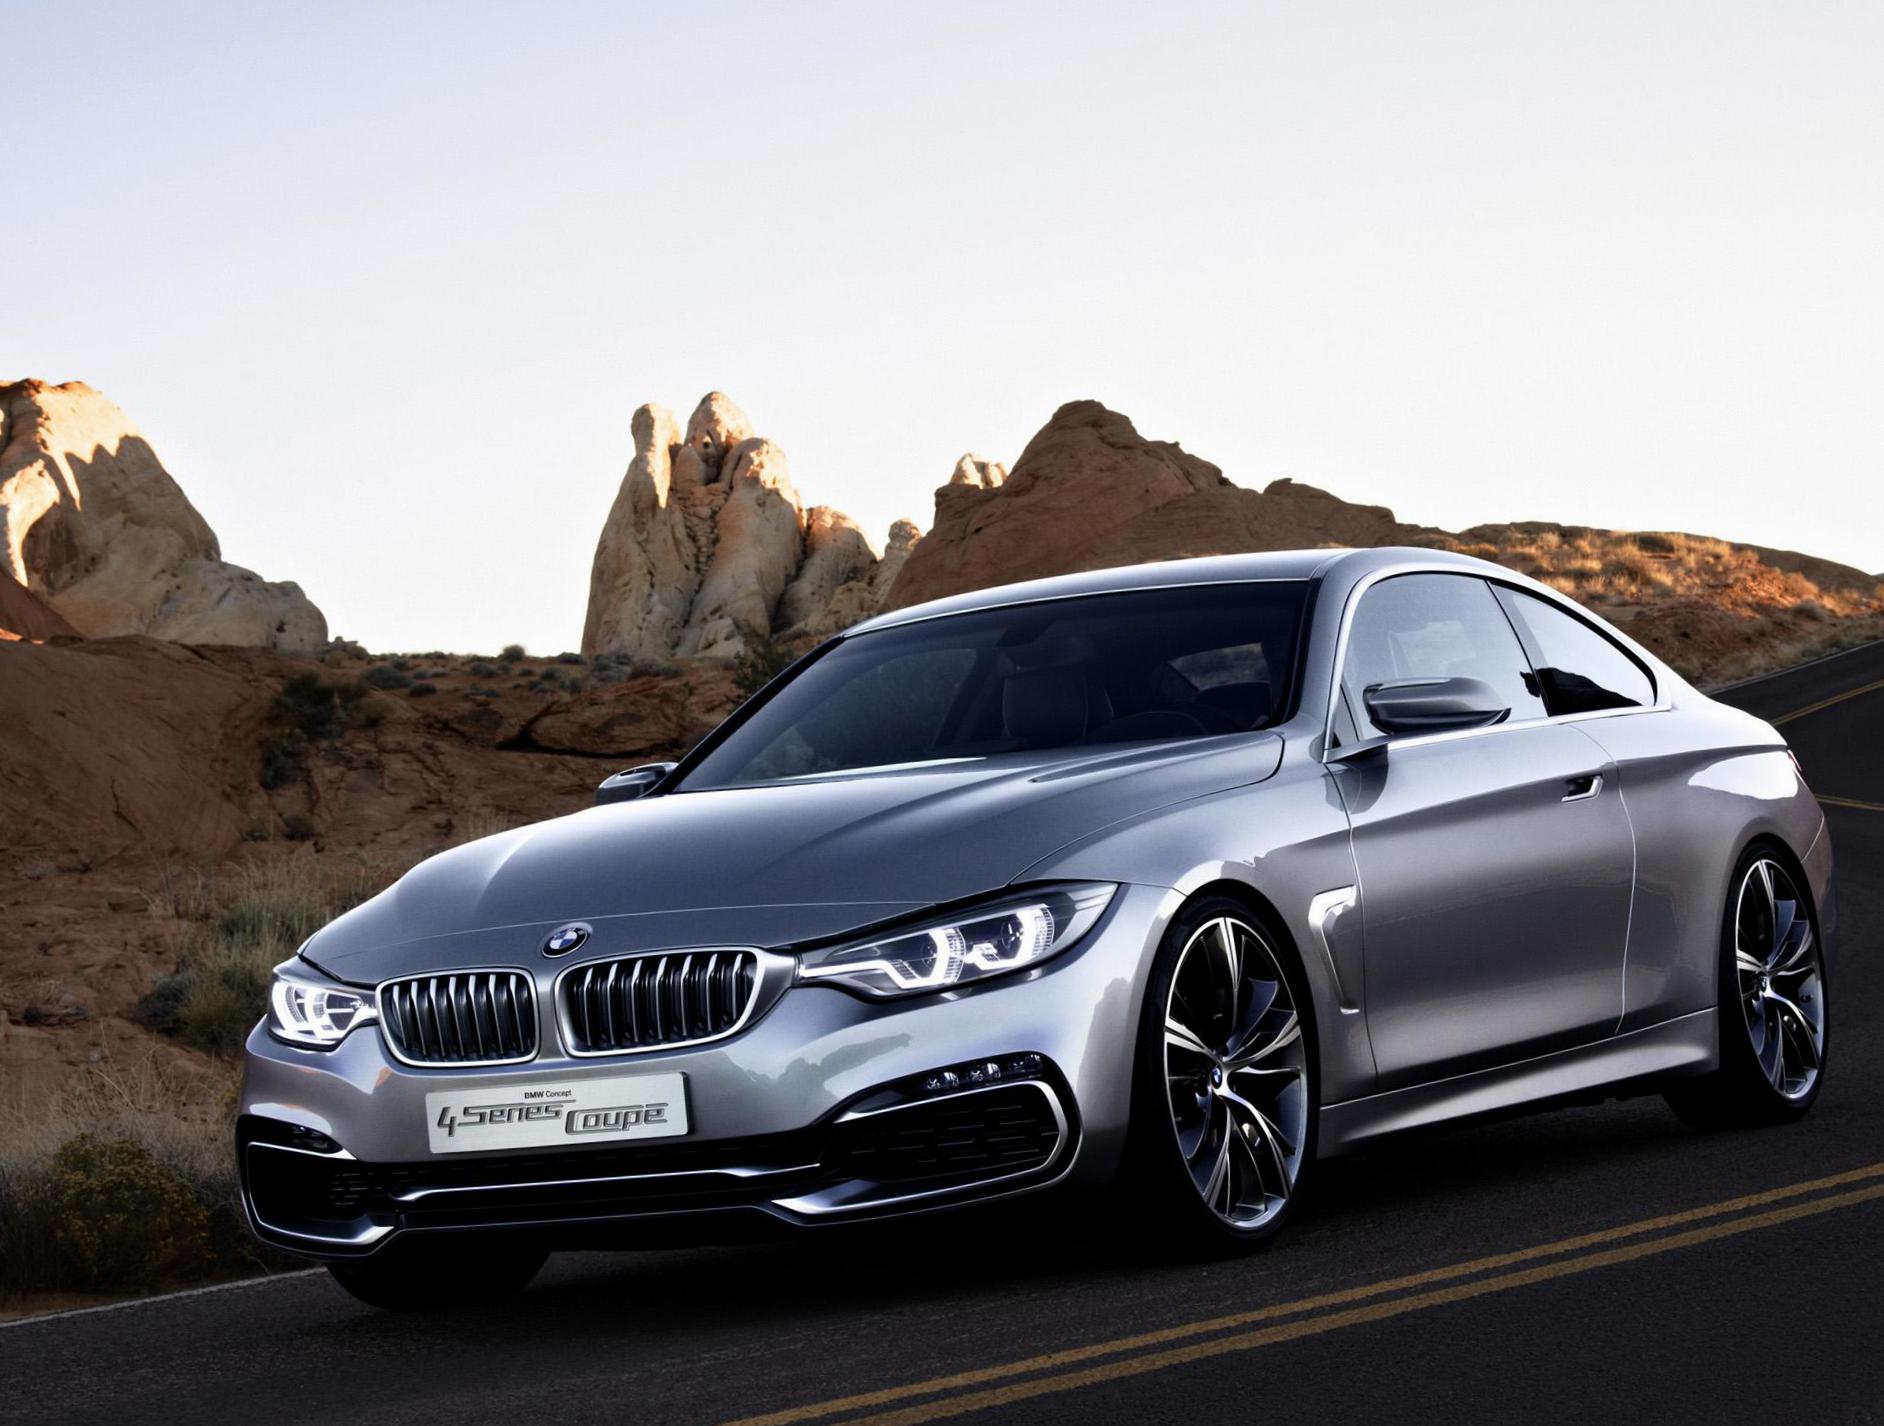 BMW 4 Series Coupe (F32) new 2013